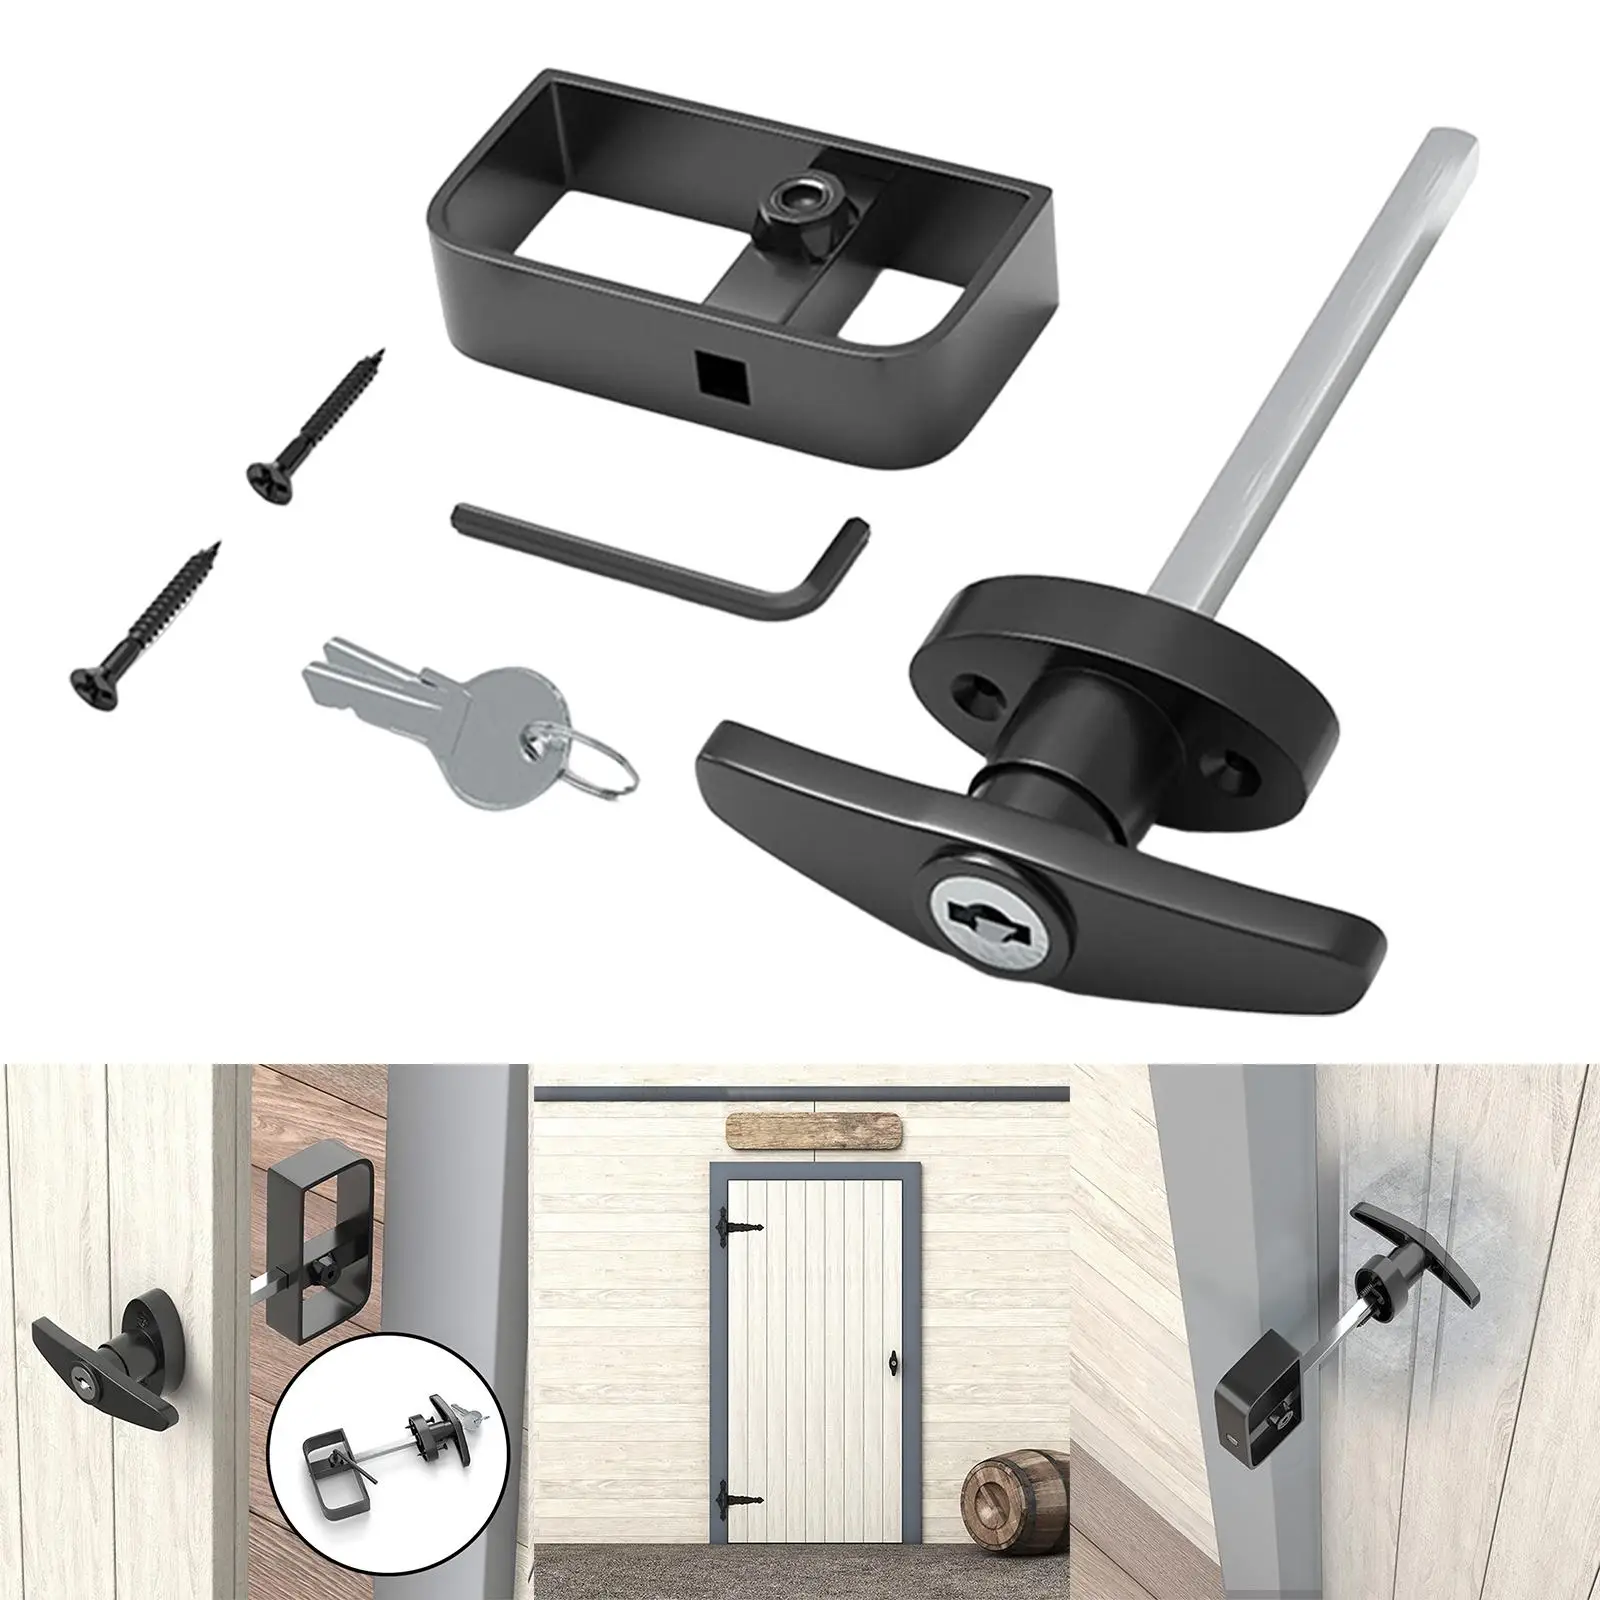 T Handle Lock with Two Keys Hardware Replacement Electric Cabinet Lock Locking for Garage Shed Barn Door Canopy Accessories